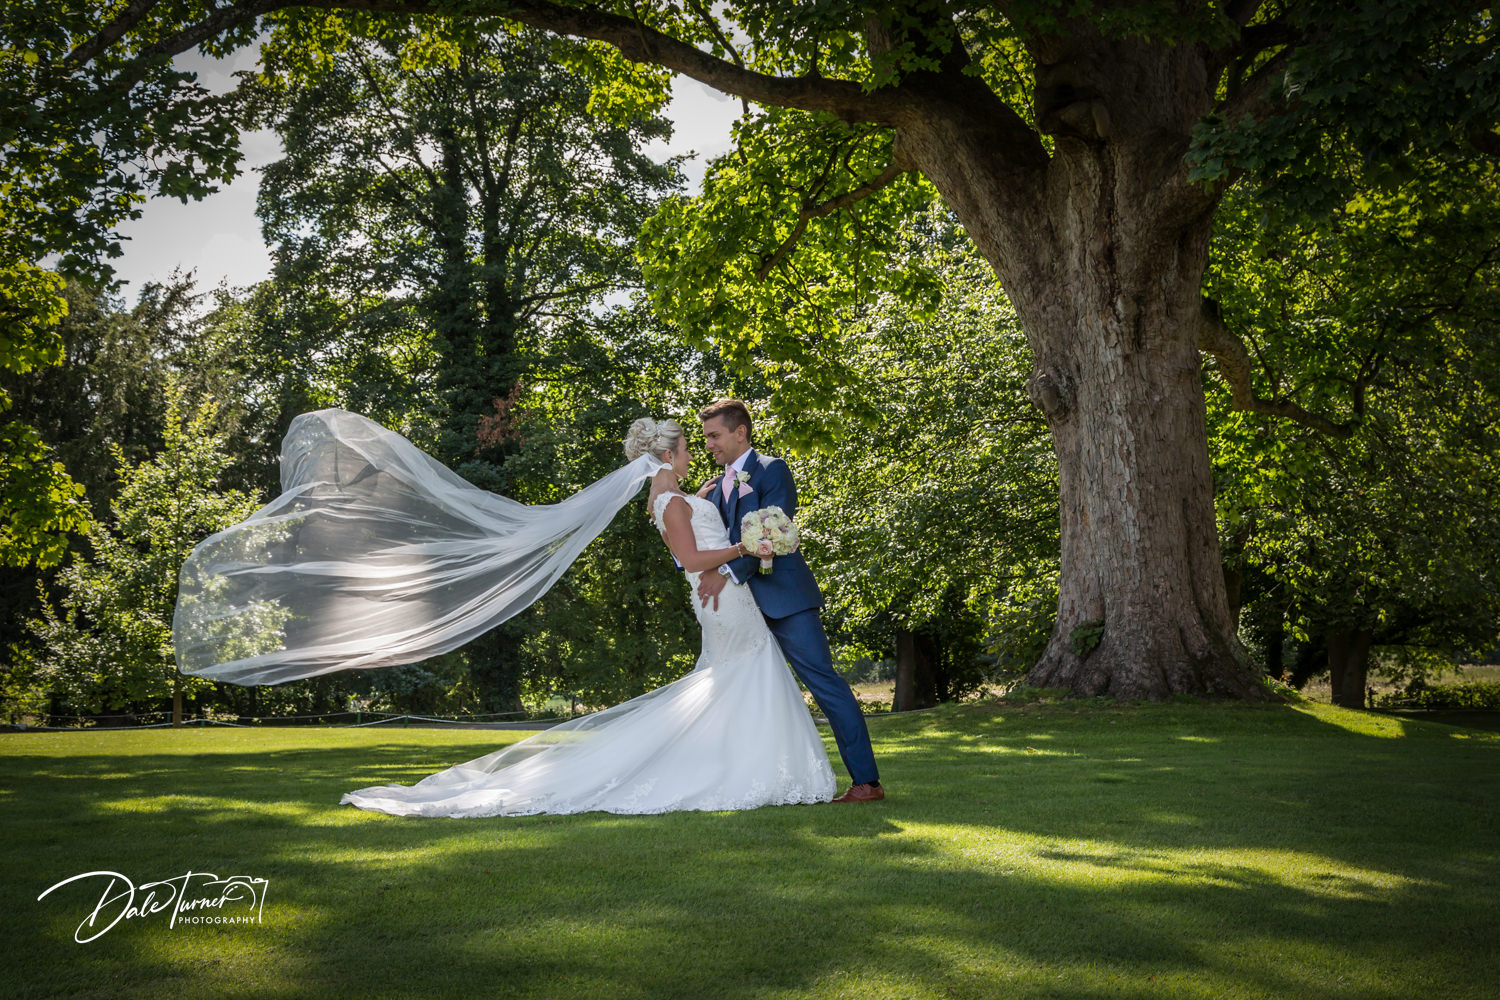 Bride and groom with cathedral length veil in the grounds of Hazlewood Castle.